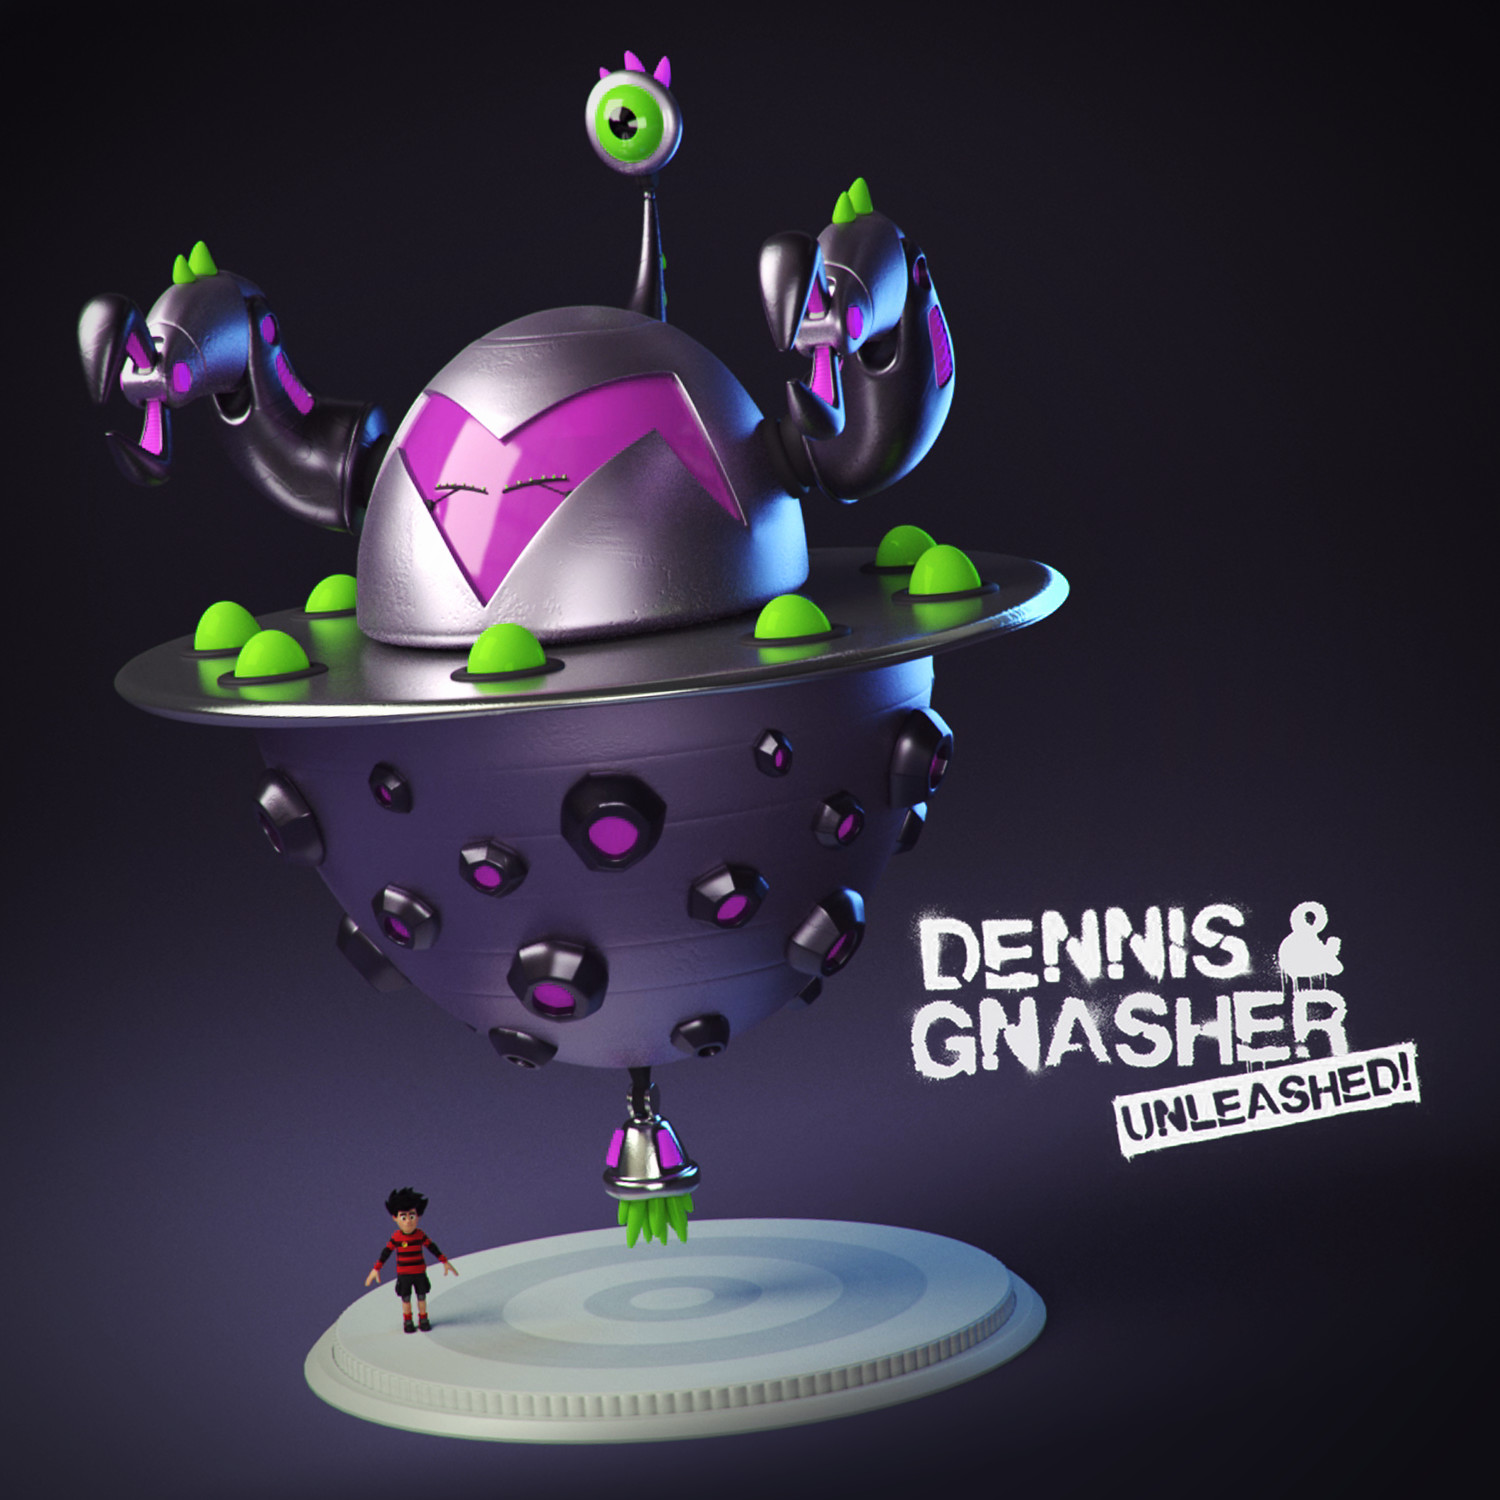 Dennis and Gnasher Unleashed! - Props and Environments vol.2